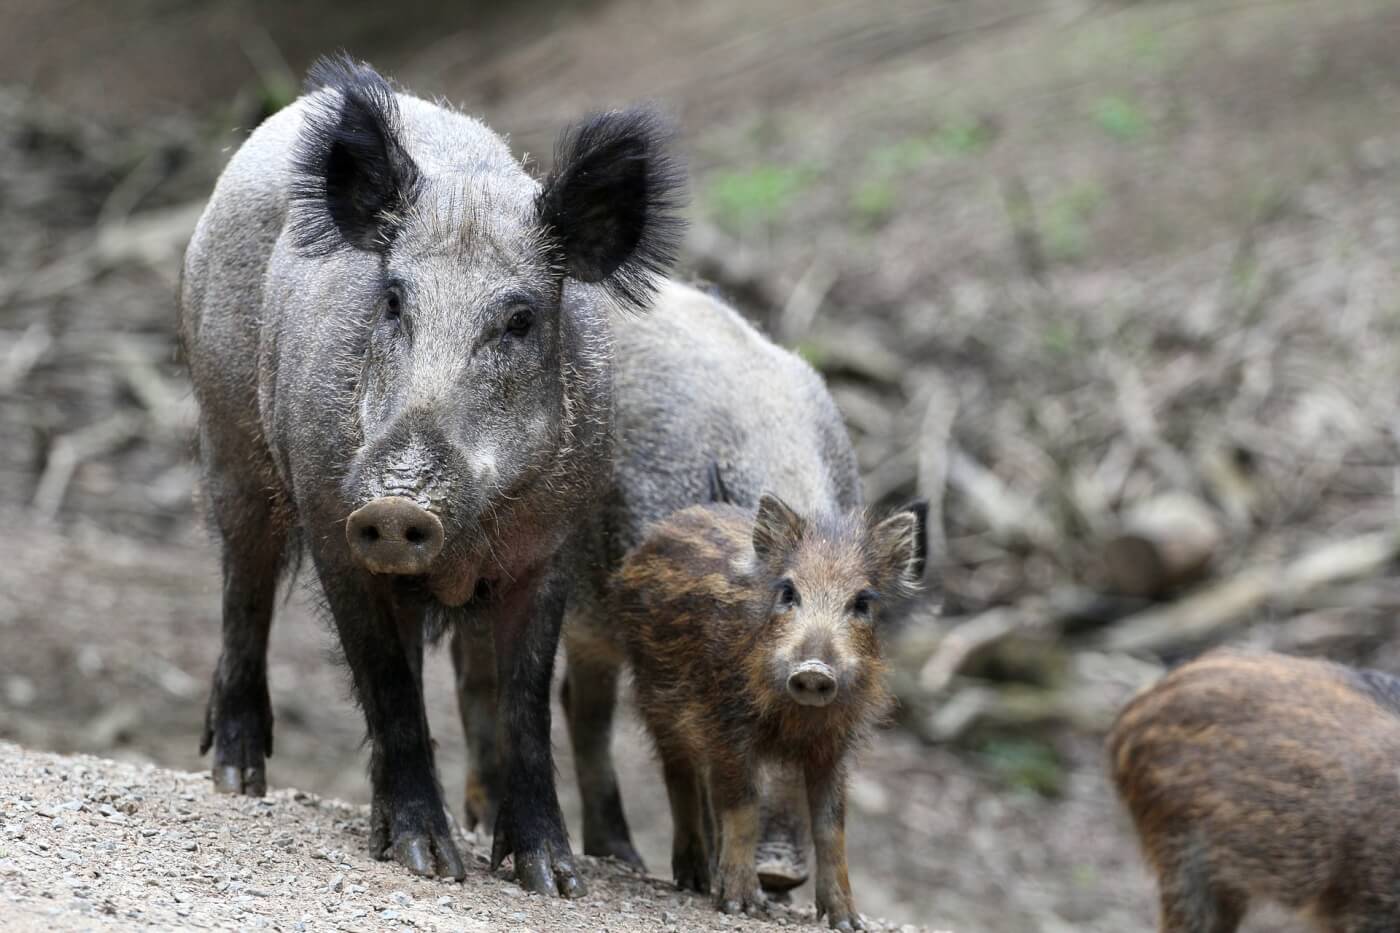 WHY?! Video Shows Men Pushing Boar Off Cliff, Killing the Animal